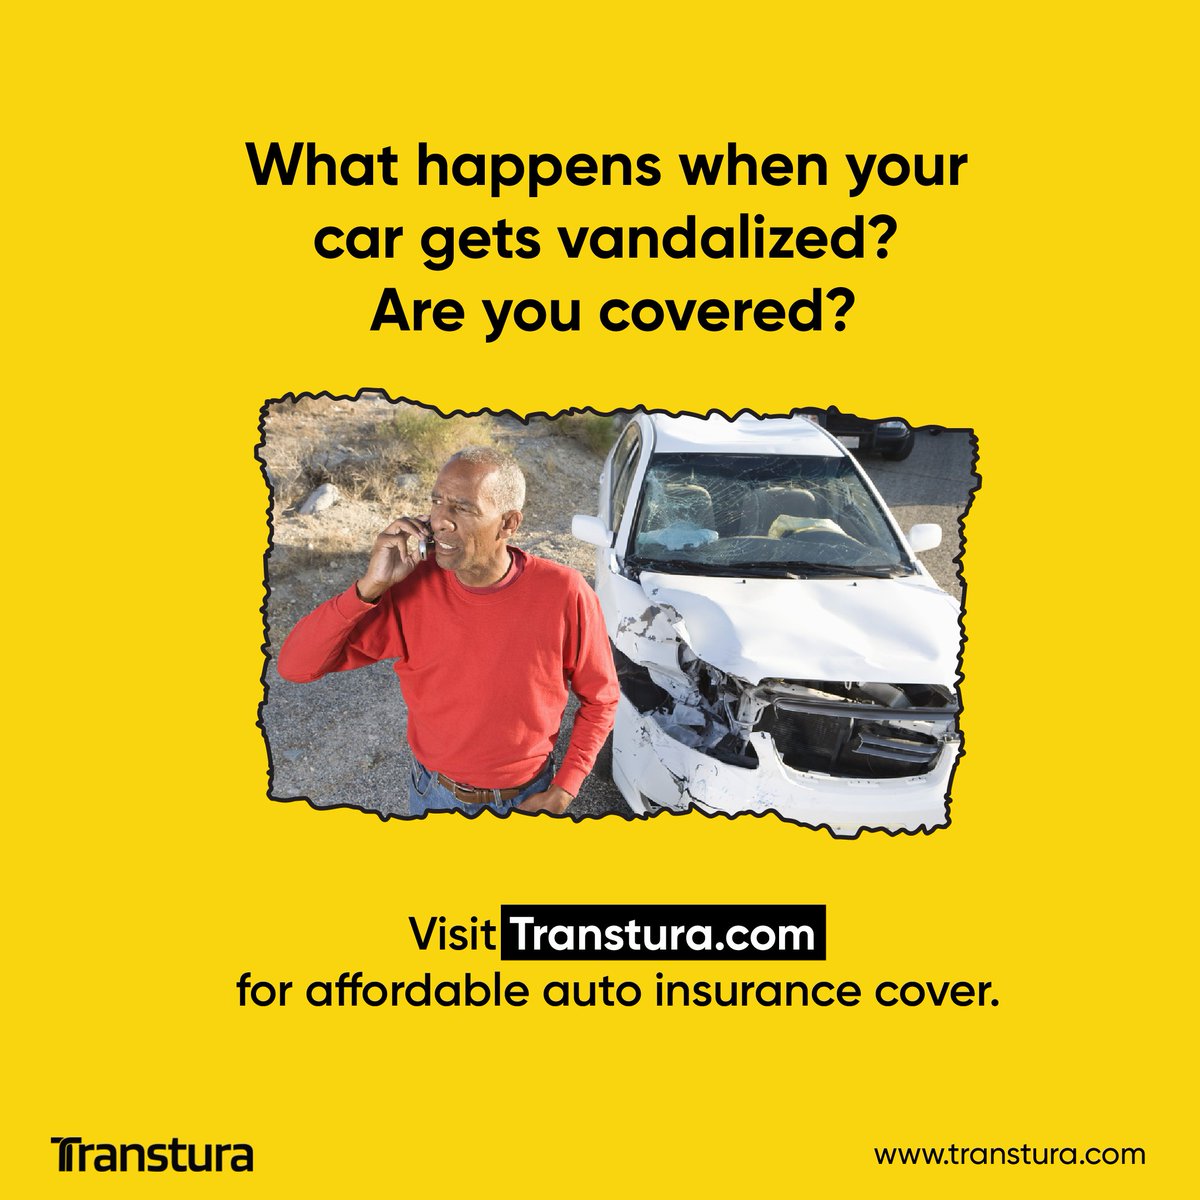 Let's help you get quality auto insurance to cover the damage caused by vandalism.#autoinsurance #auto #carinsurance #carcoverage #carinsurancecover #carvandalism #carvandalismcover  #carinsurancecoverage #carcoverage #carcoverage #carvandalism #accident